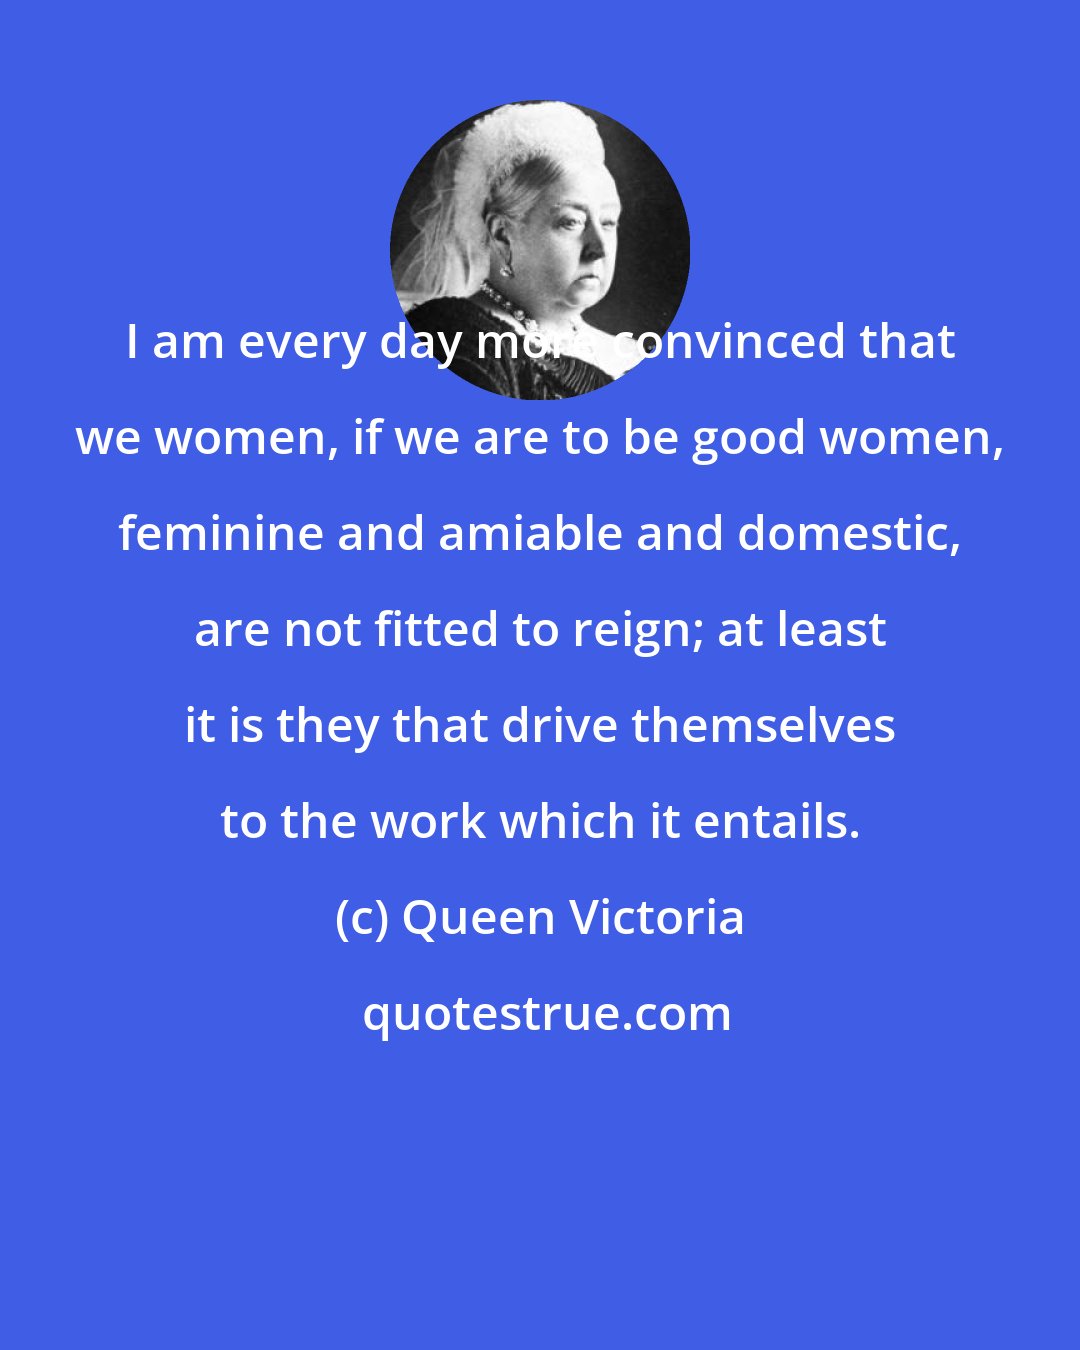 Queen Victoria: I am every day more convinced that we women, if we are to be good women, feminine and amiable and domestic, are not fitted to reign; at least it is they that drive themselves to the work which it entails.